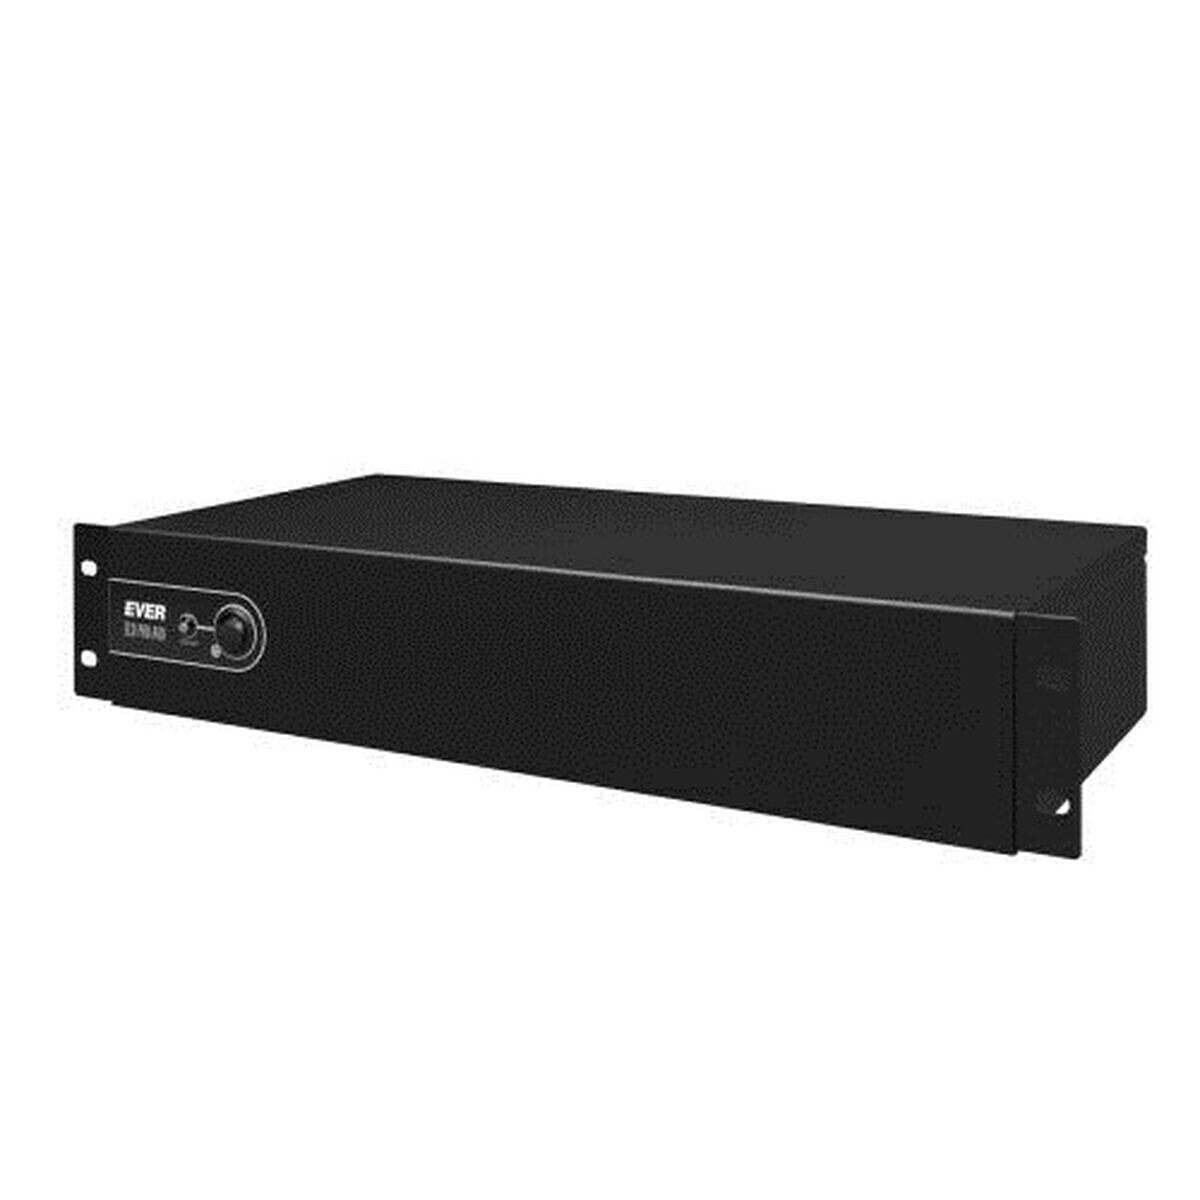 Uninterruptible Power Supply System Interactive UPS Ever ECO Pro 700 AVR CDS 420 W